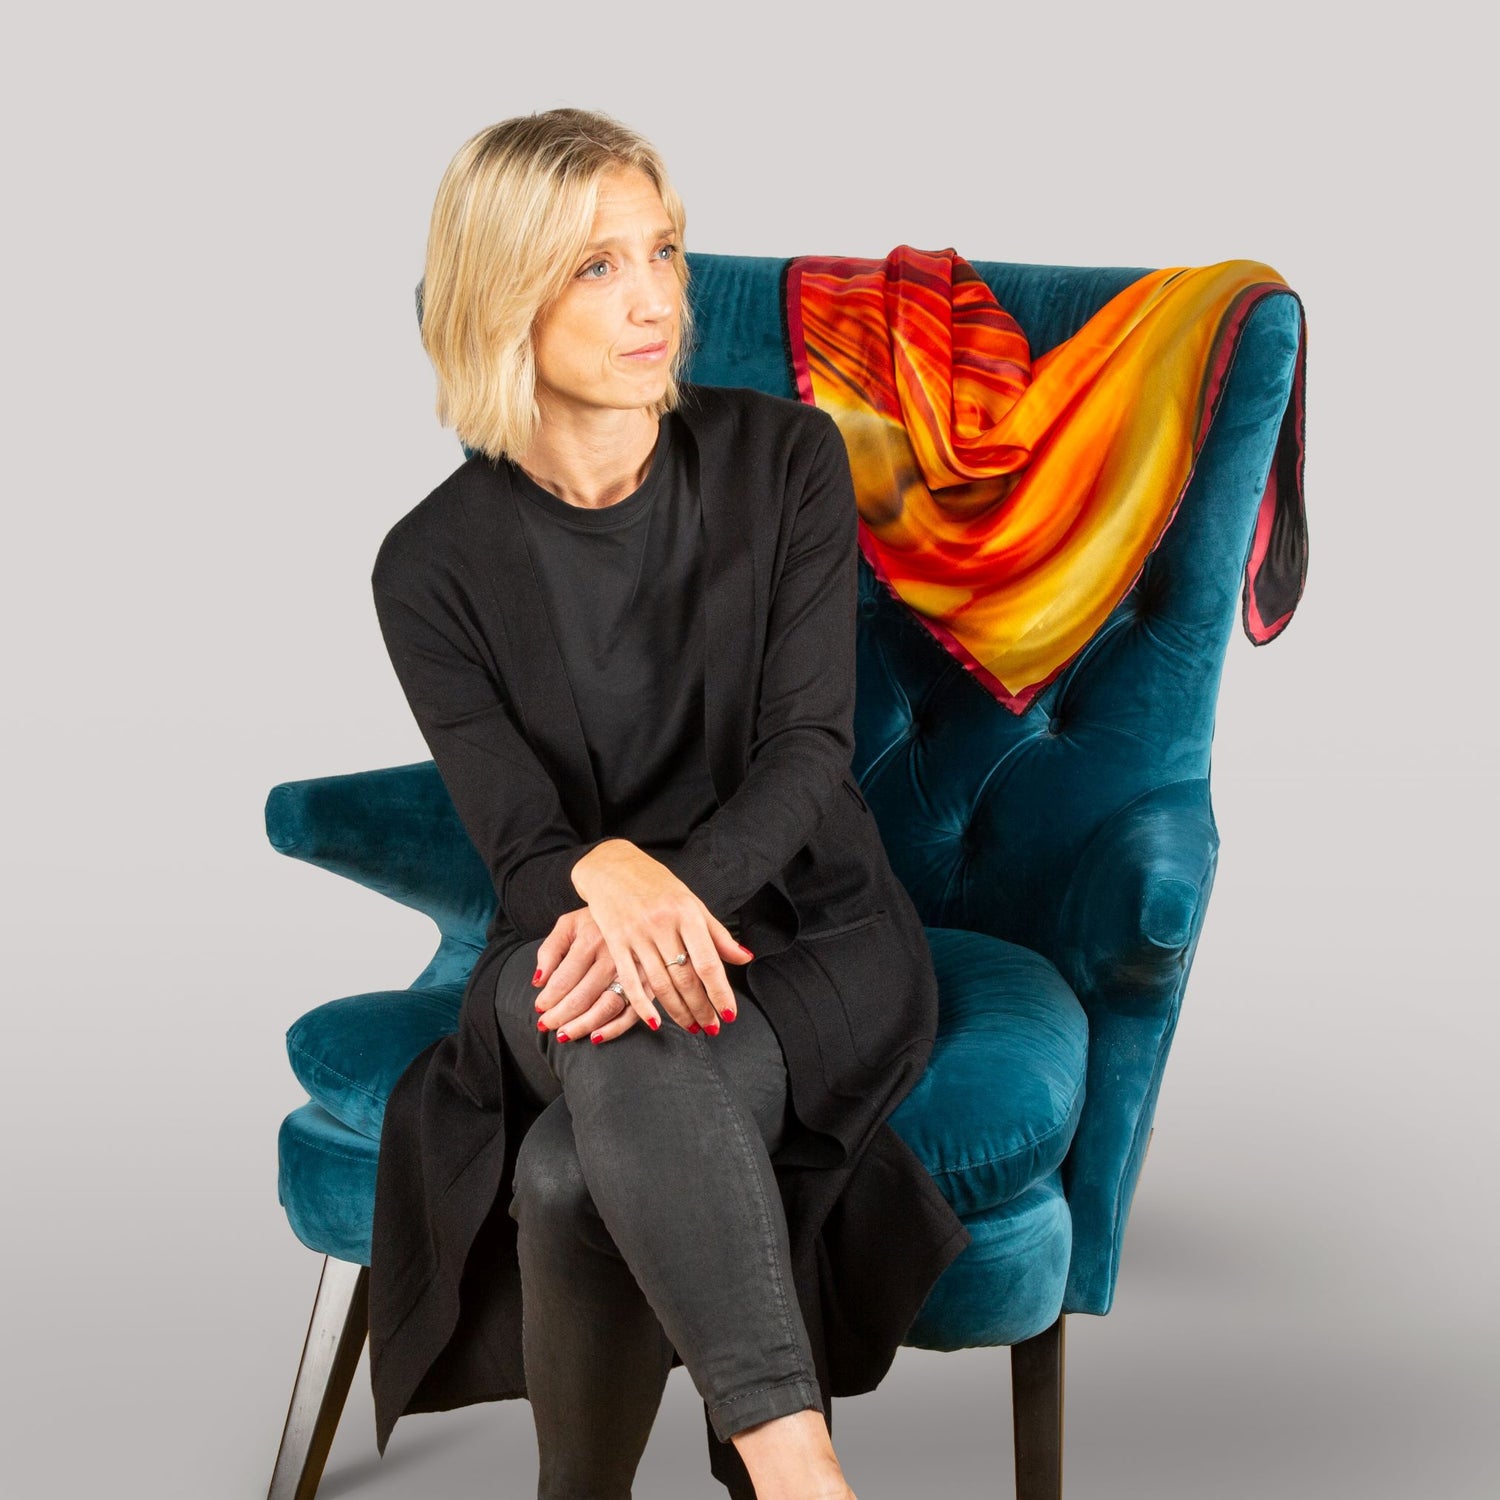 Siwan Oldham from By Biology sitting on armchair with a lava red silk scarf draped on the chair